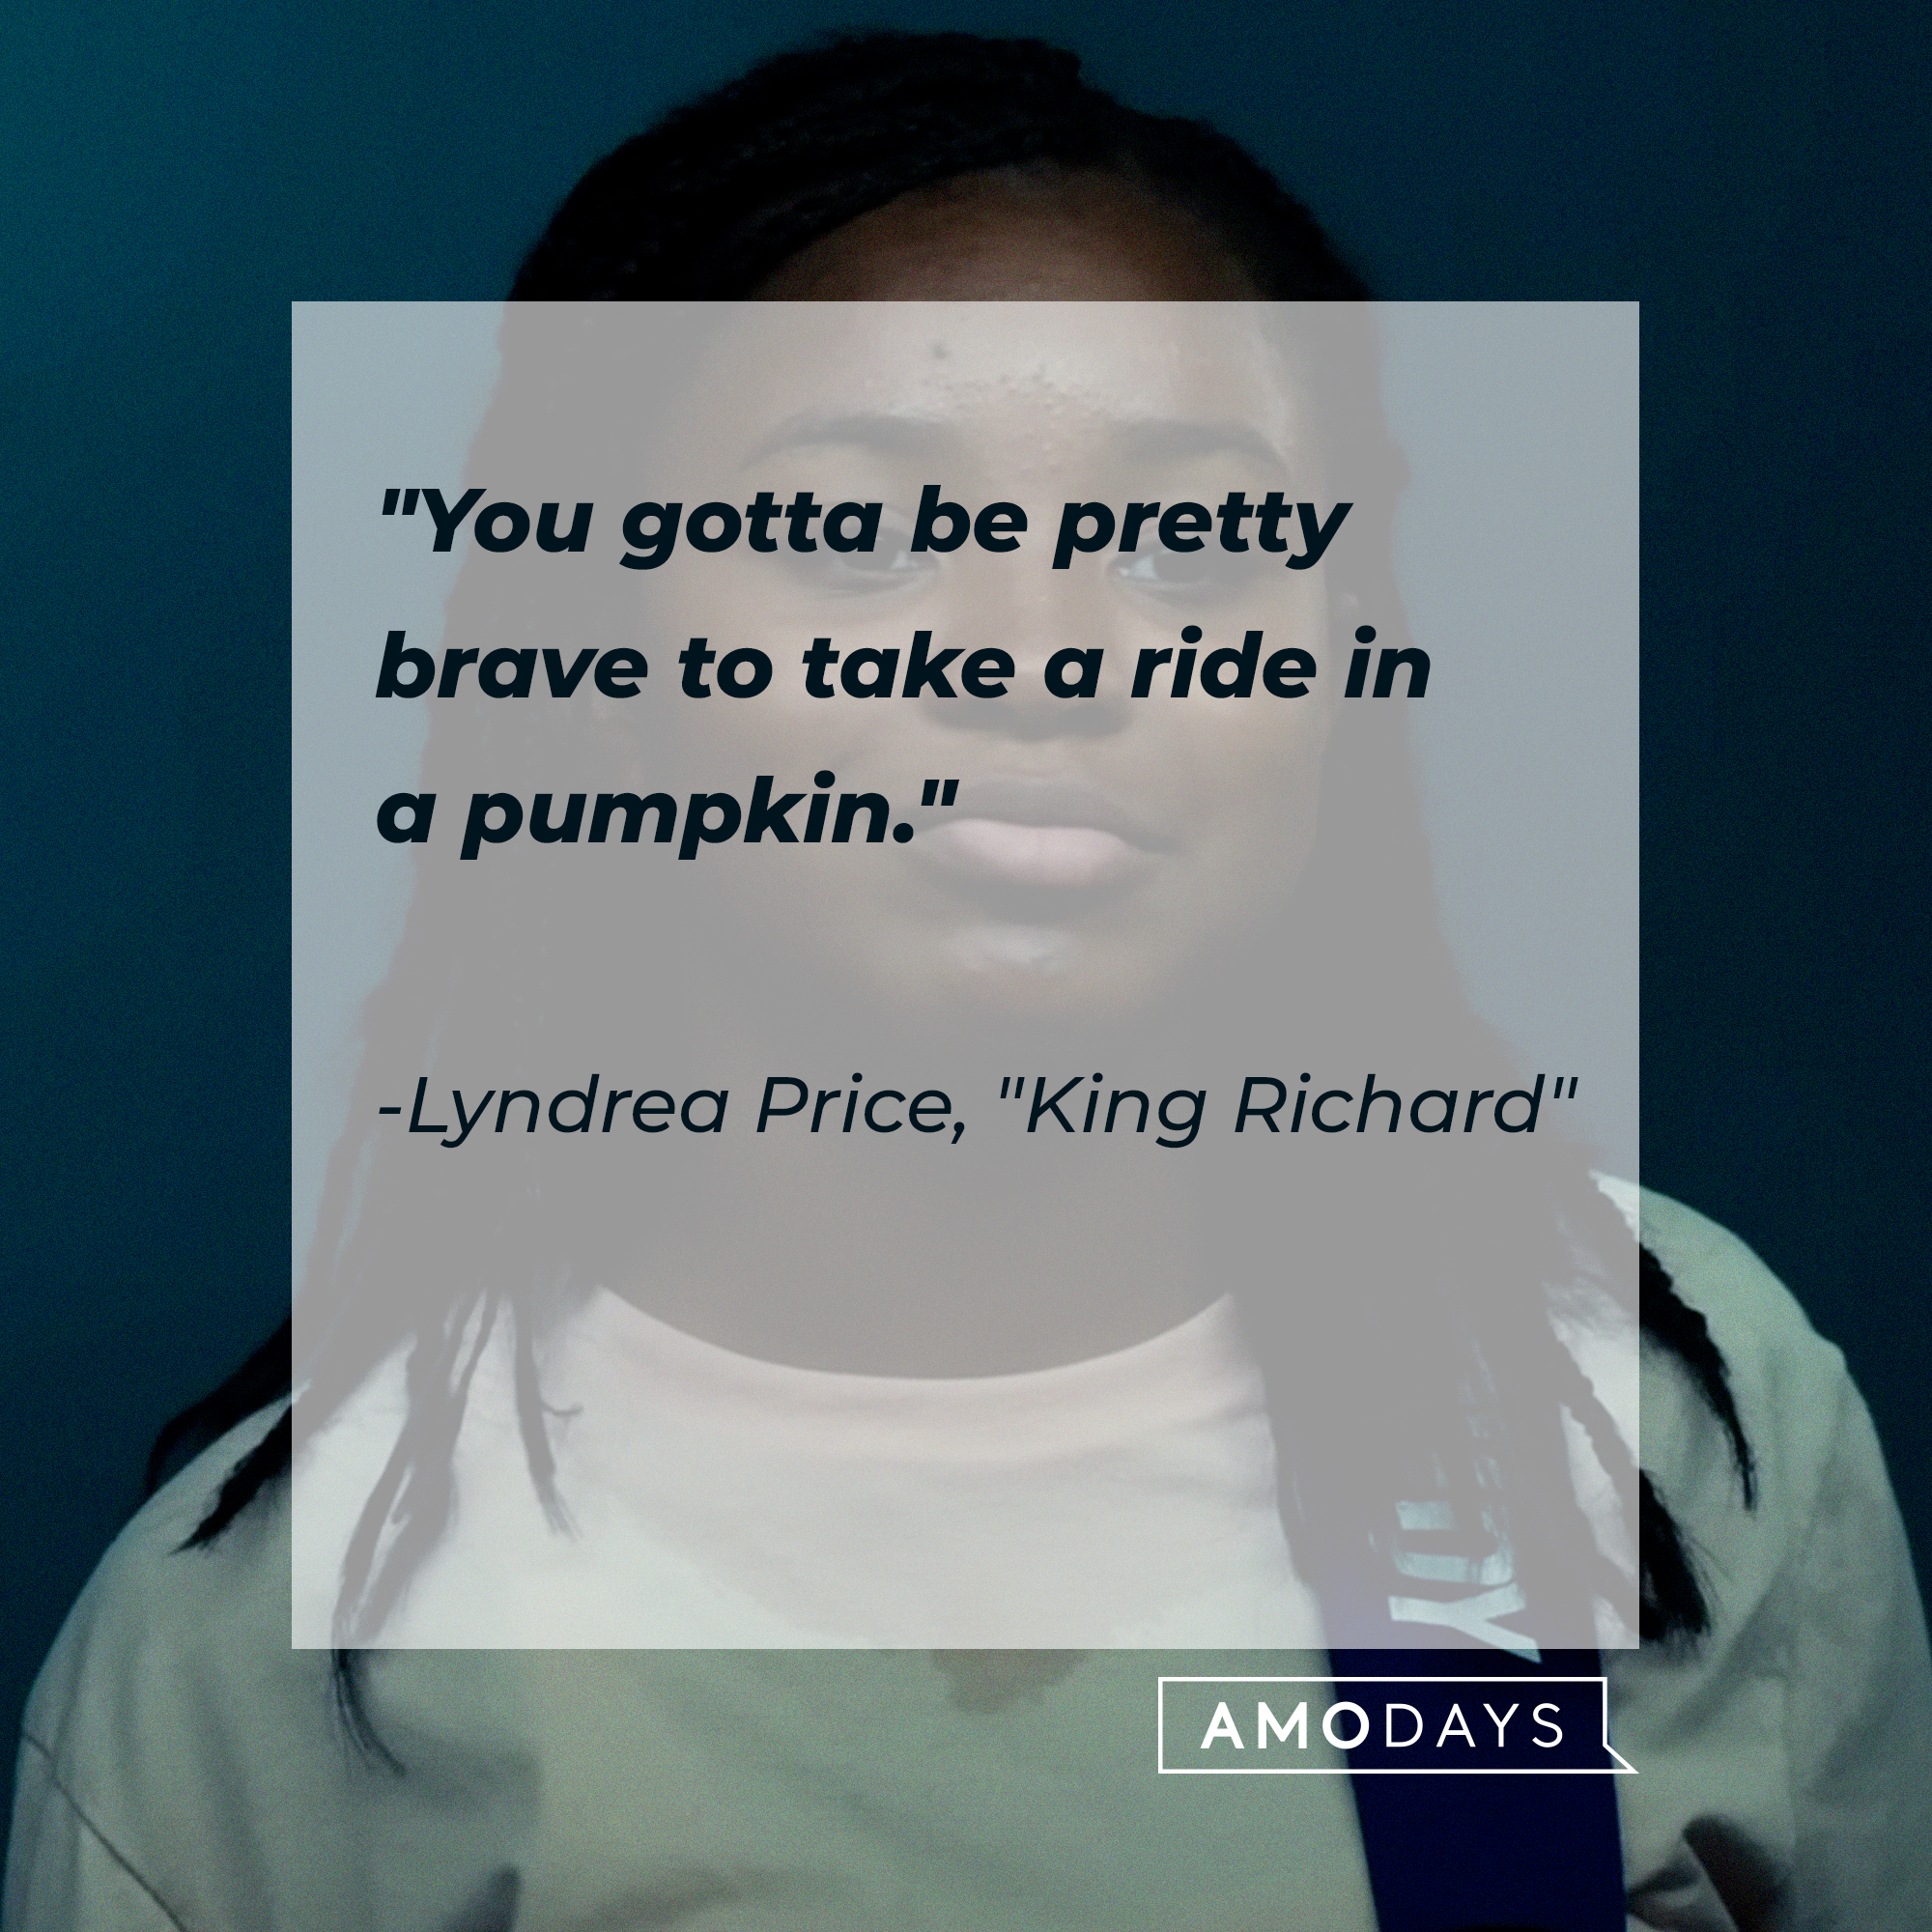 Lyndrea Price‘s quote: "You gotta be pretty brave to take a ride in a pumpkin." | Image: youtube.com/WarnerBrosPictures